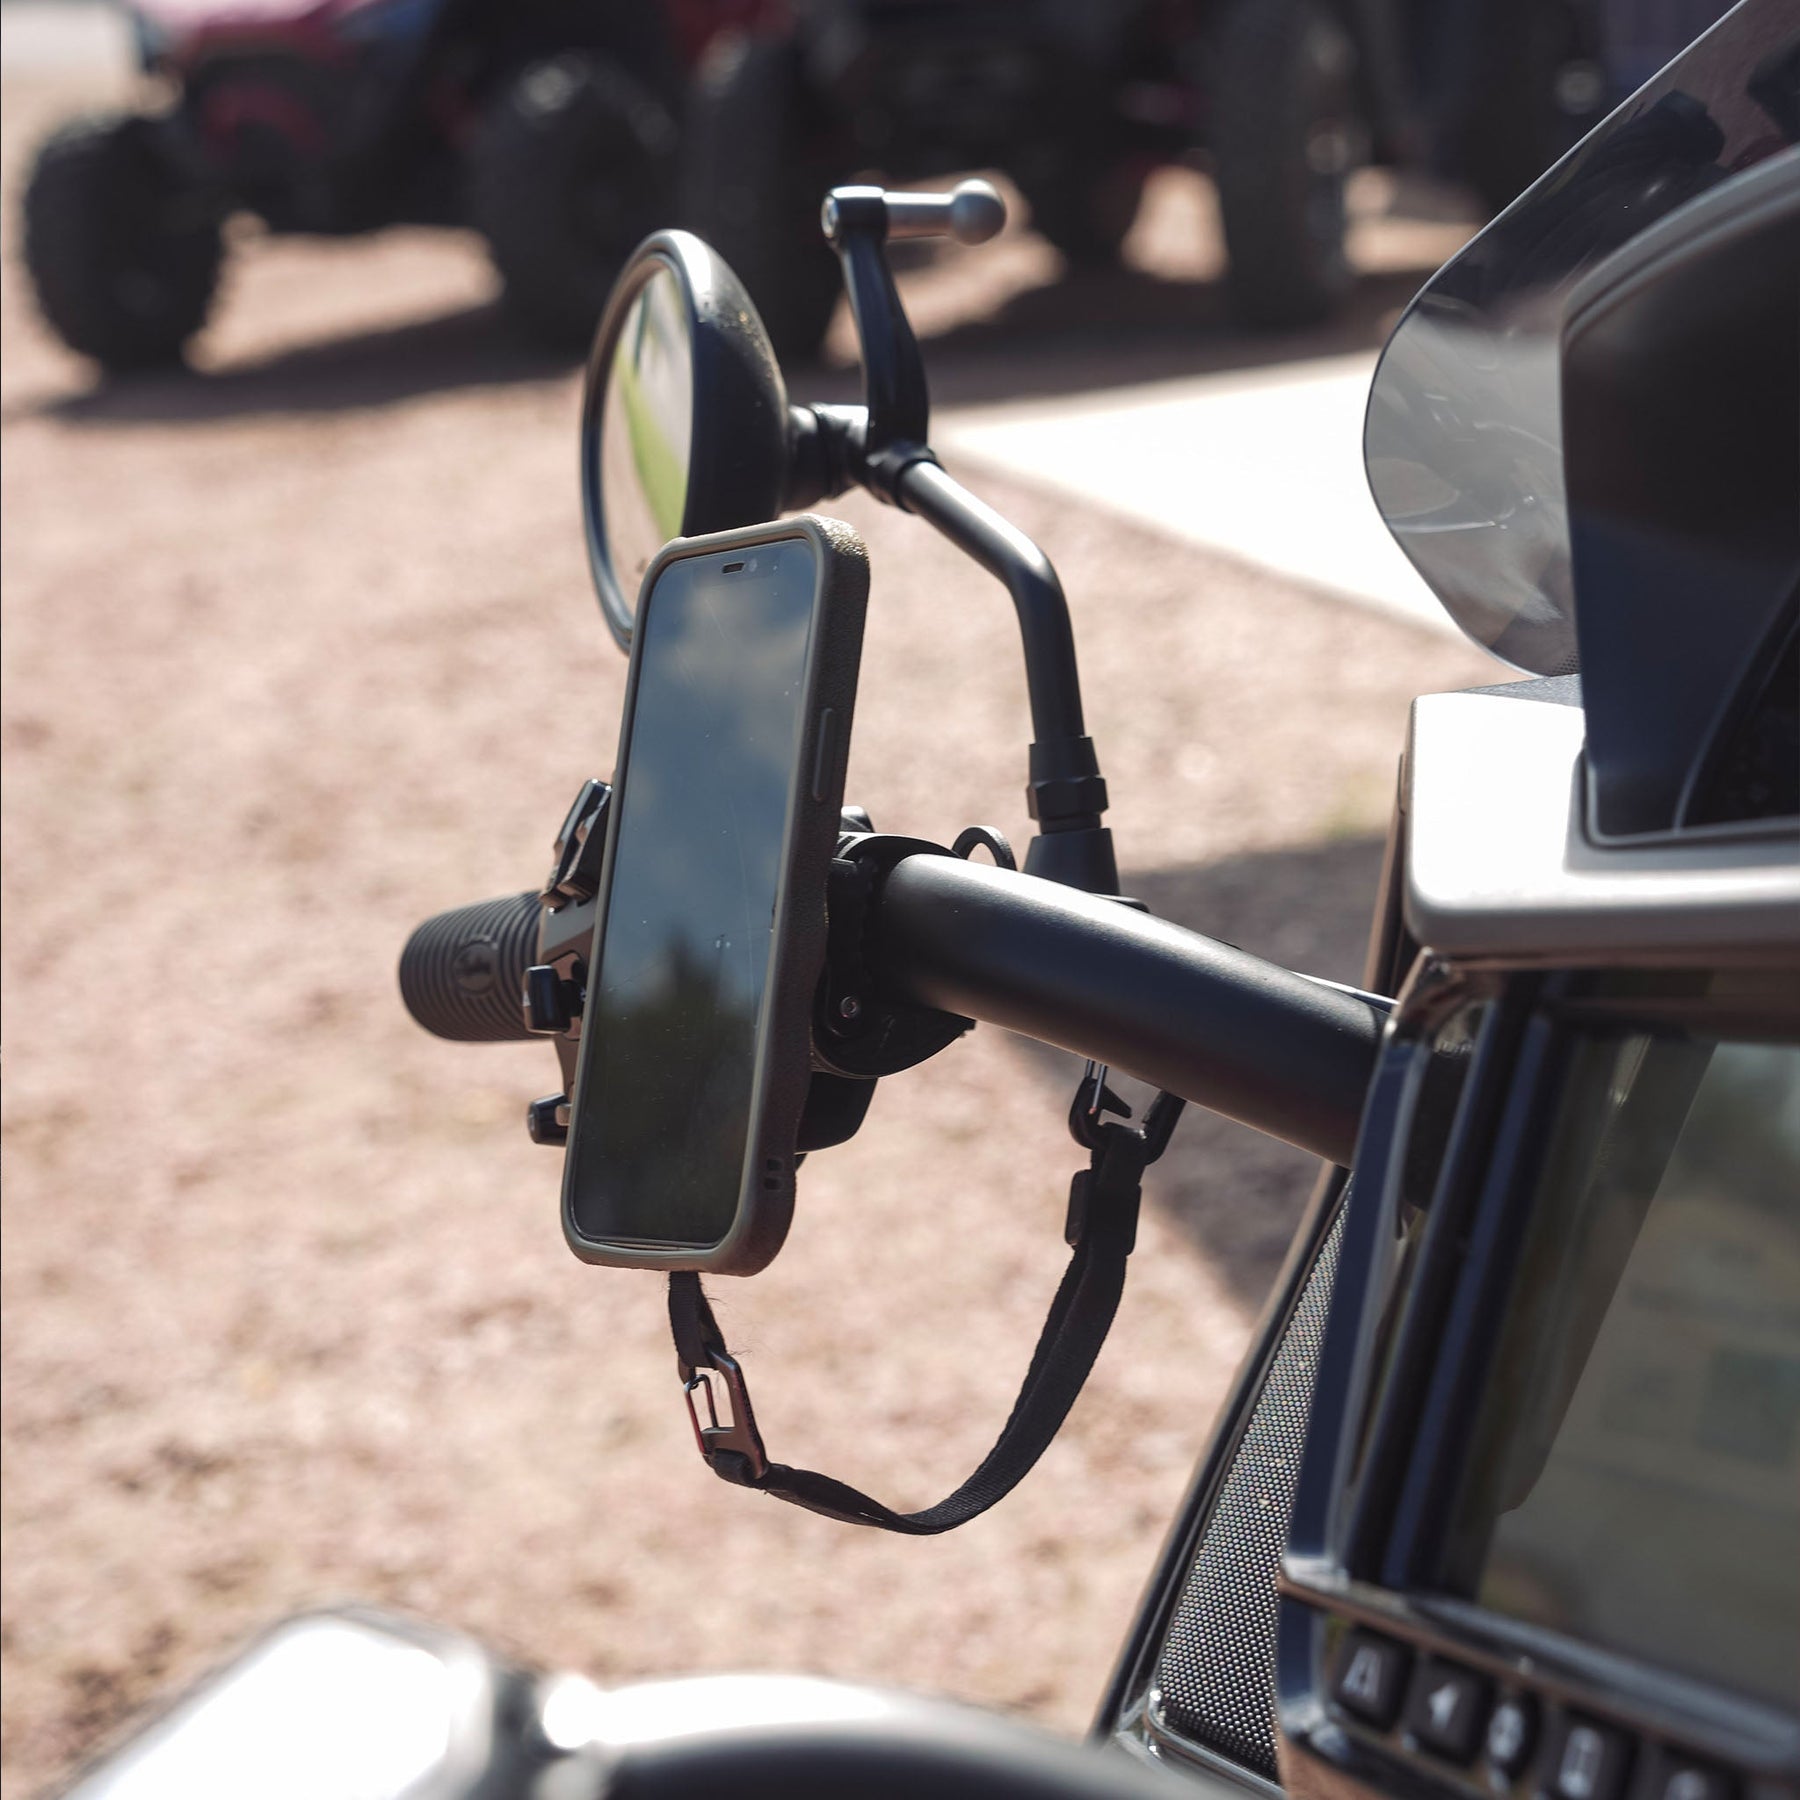 nomad™ Universal Magnetic Phone Mount on bike with phone 